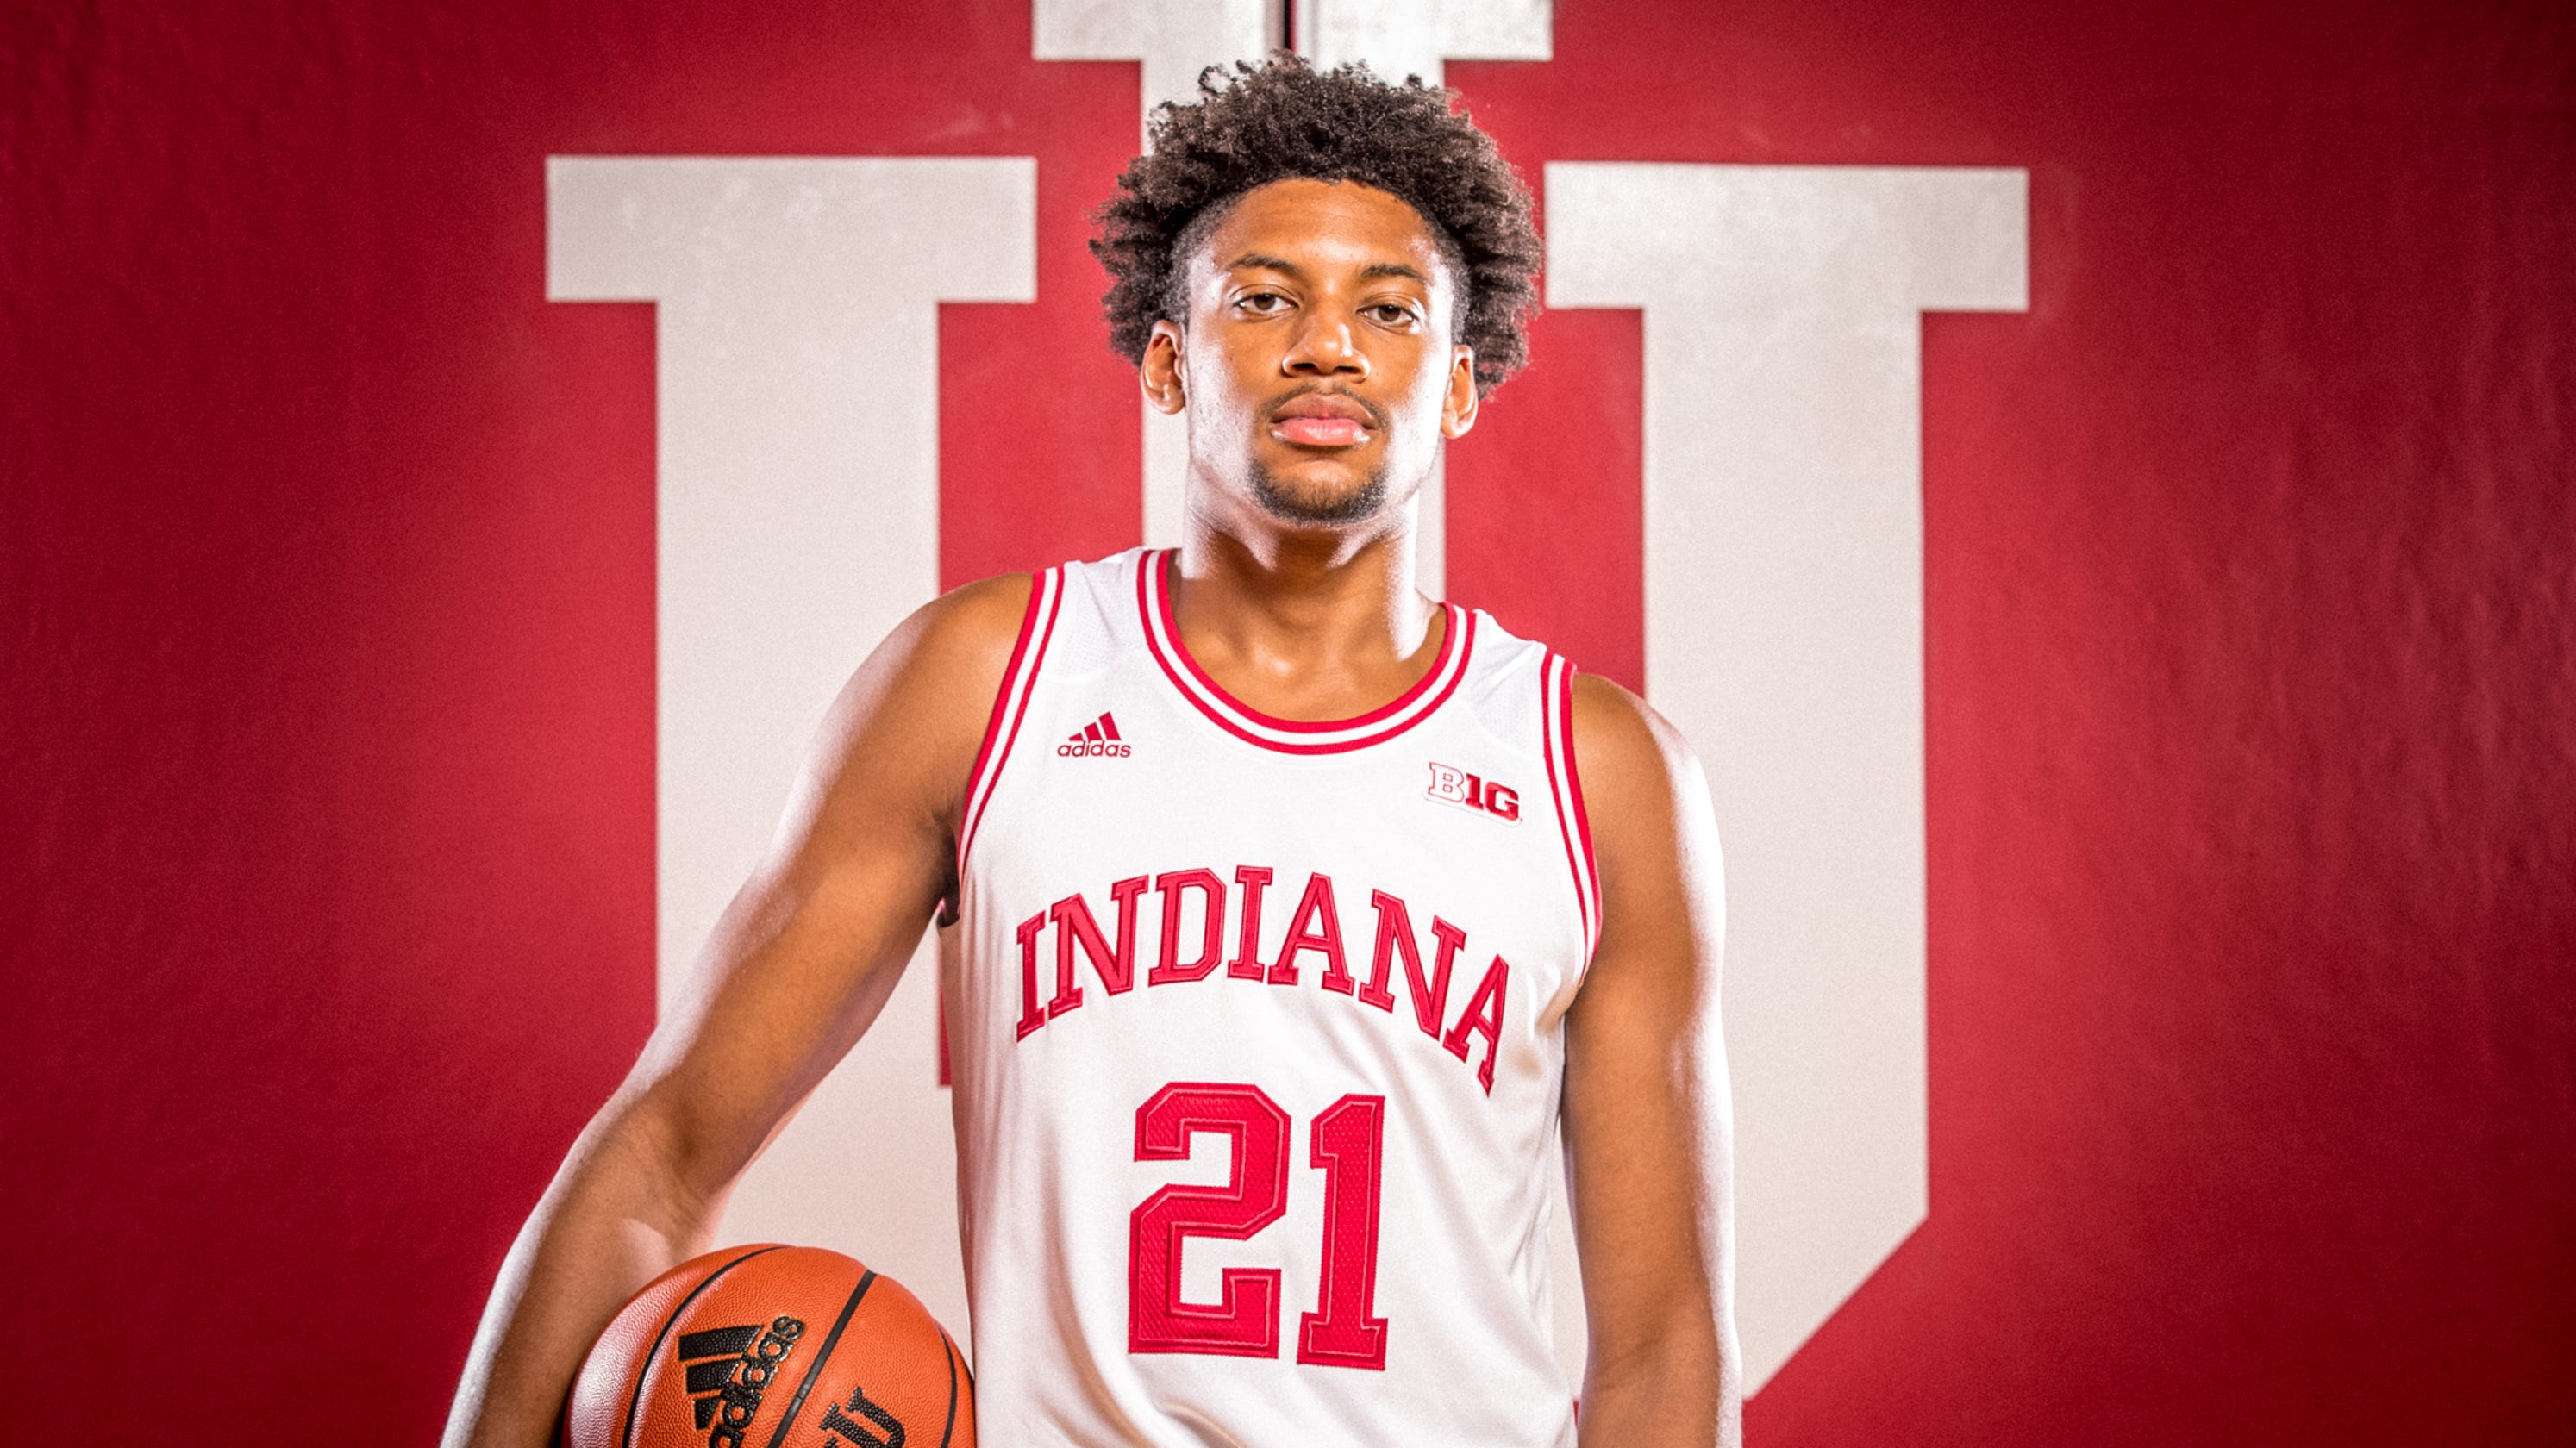 iu basketball freshman jerome hunter out indefinitely after surgery